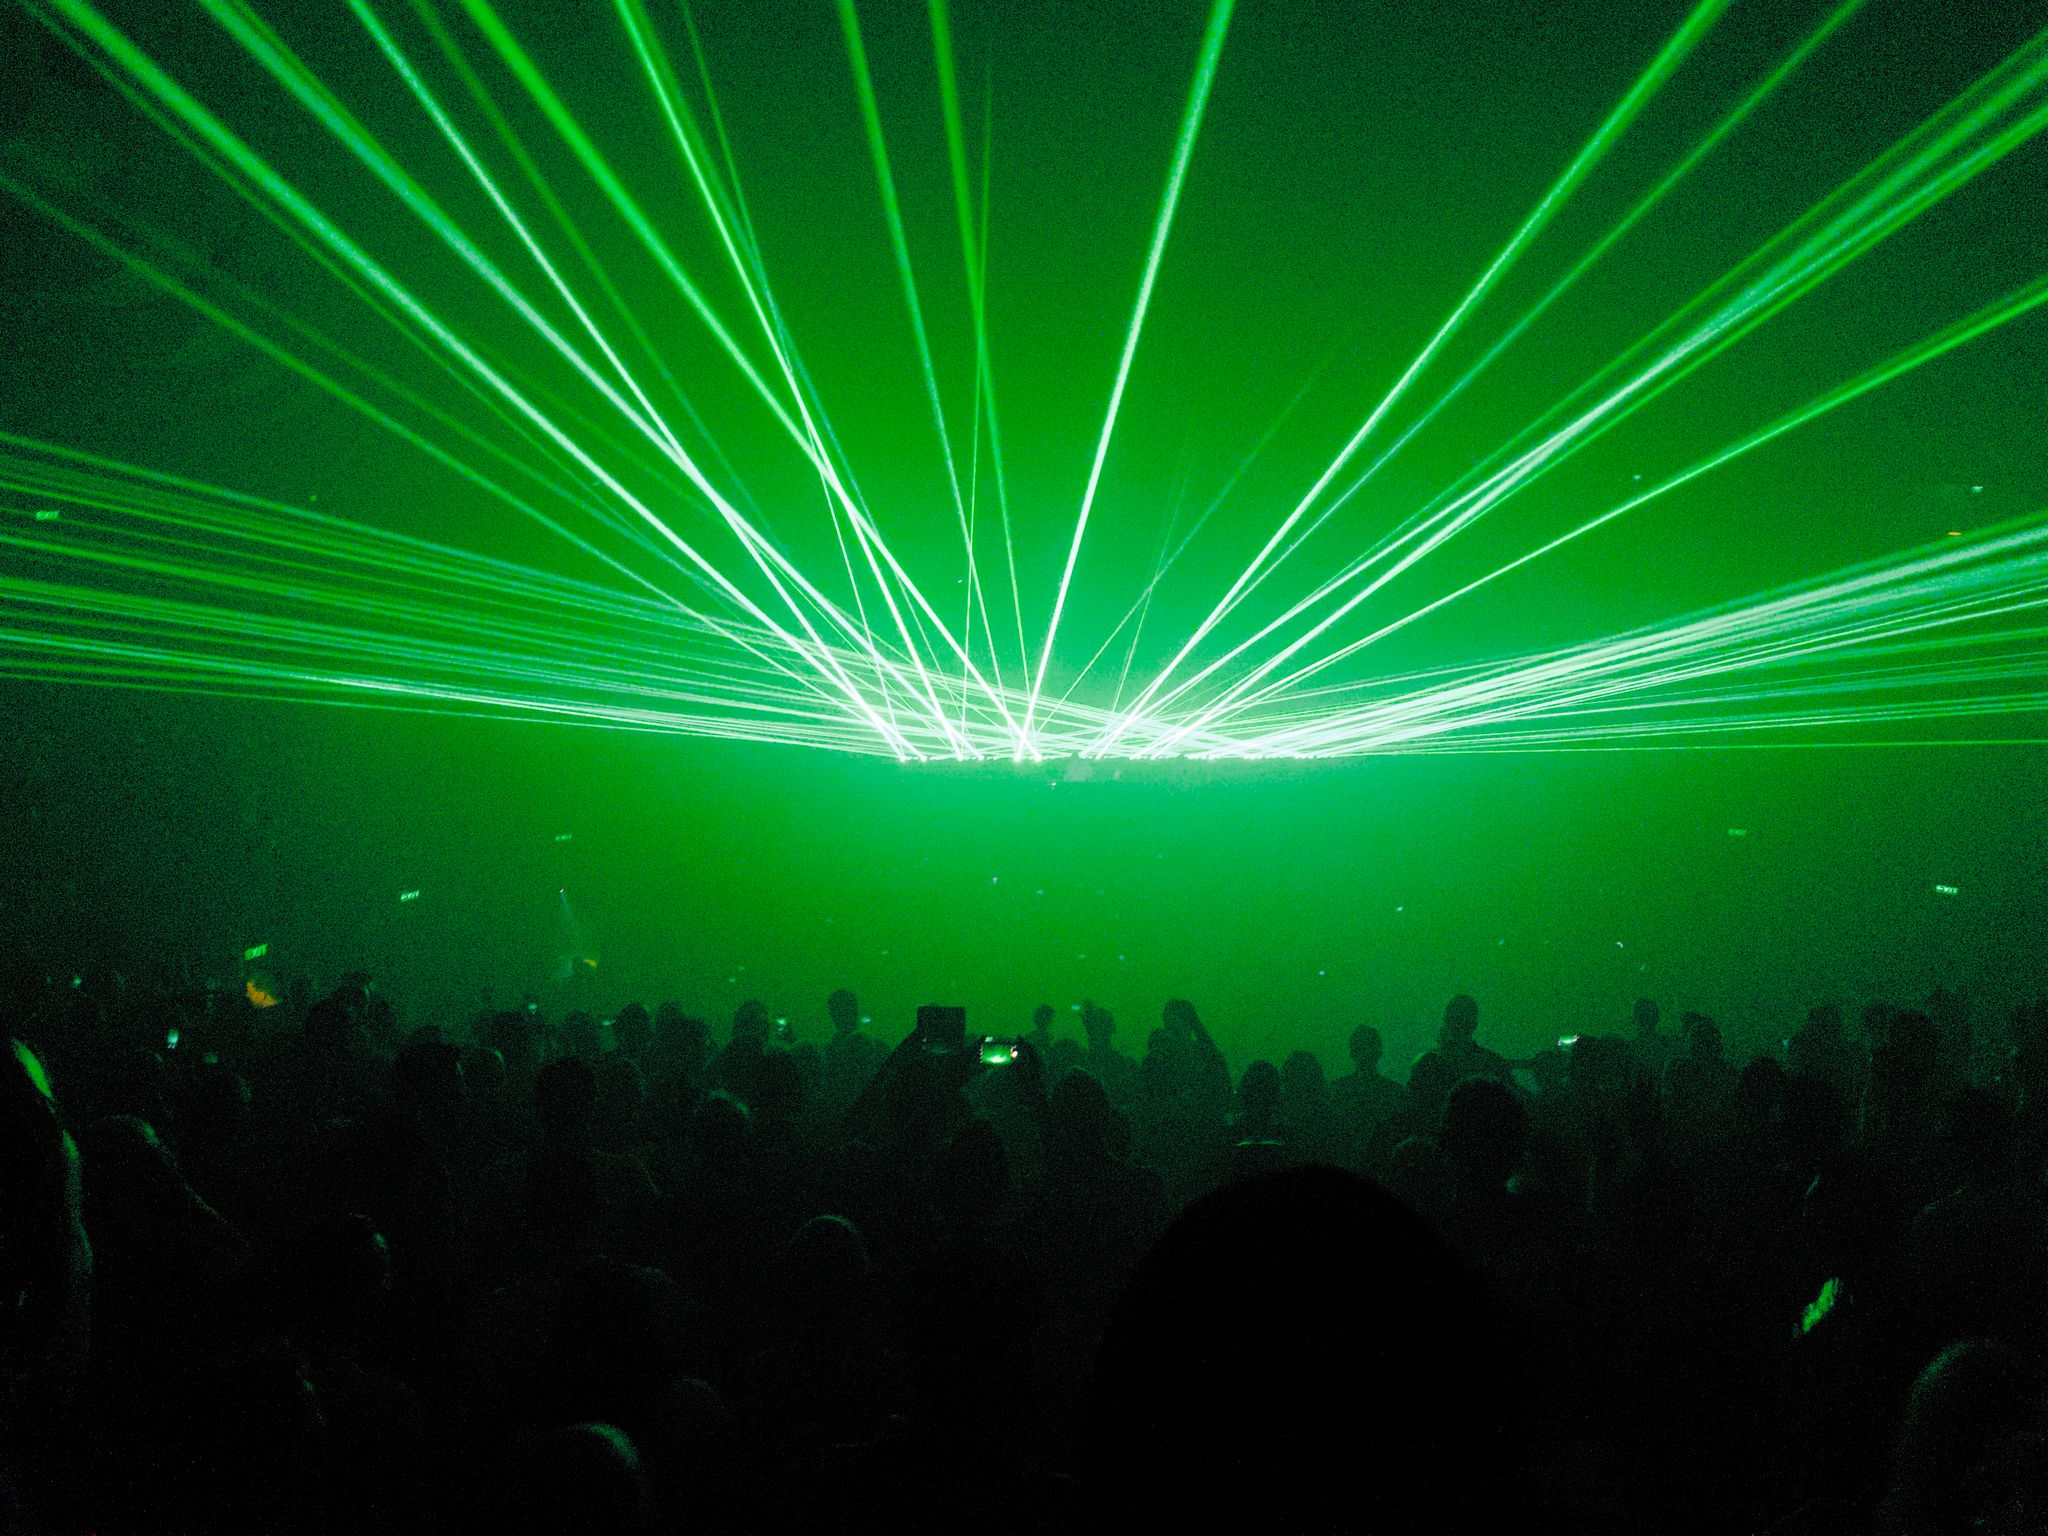 Many bright green lasers shooting out from the stage above the point of view of the photo, with the crowd visible at the bottom in an eerie green glow.